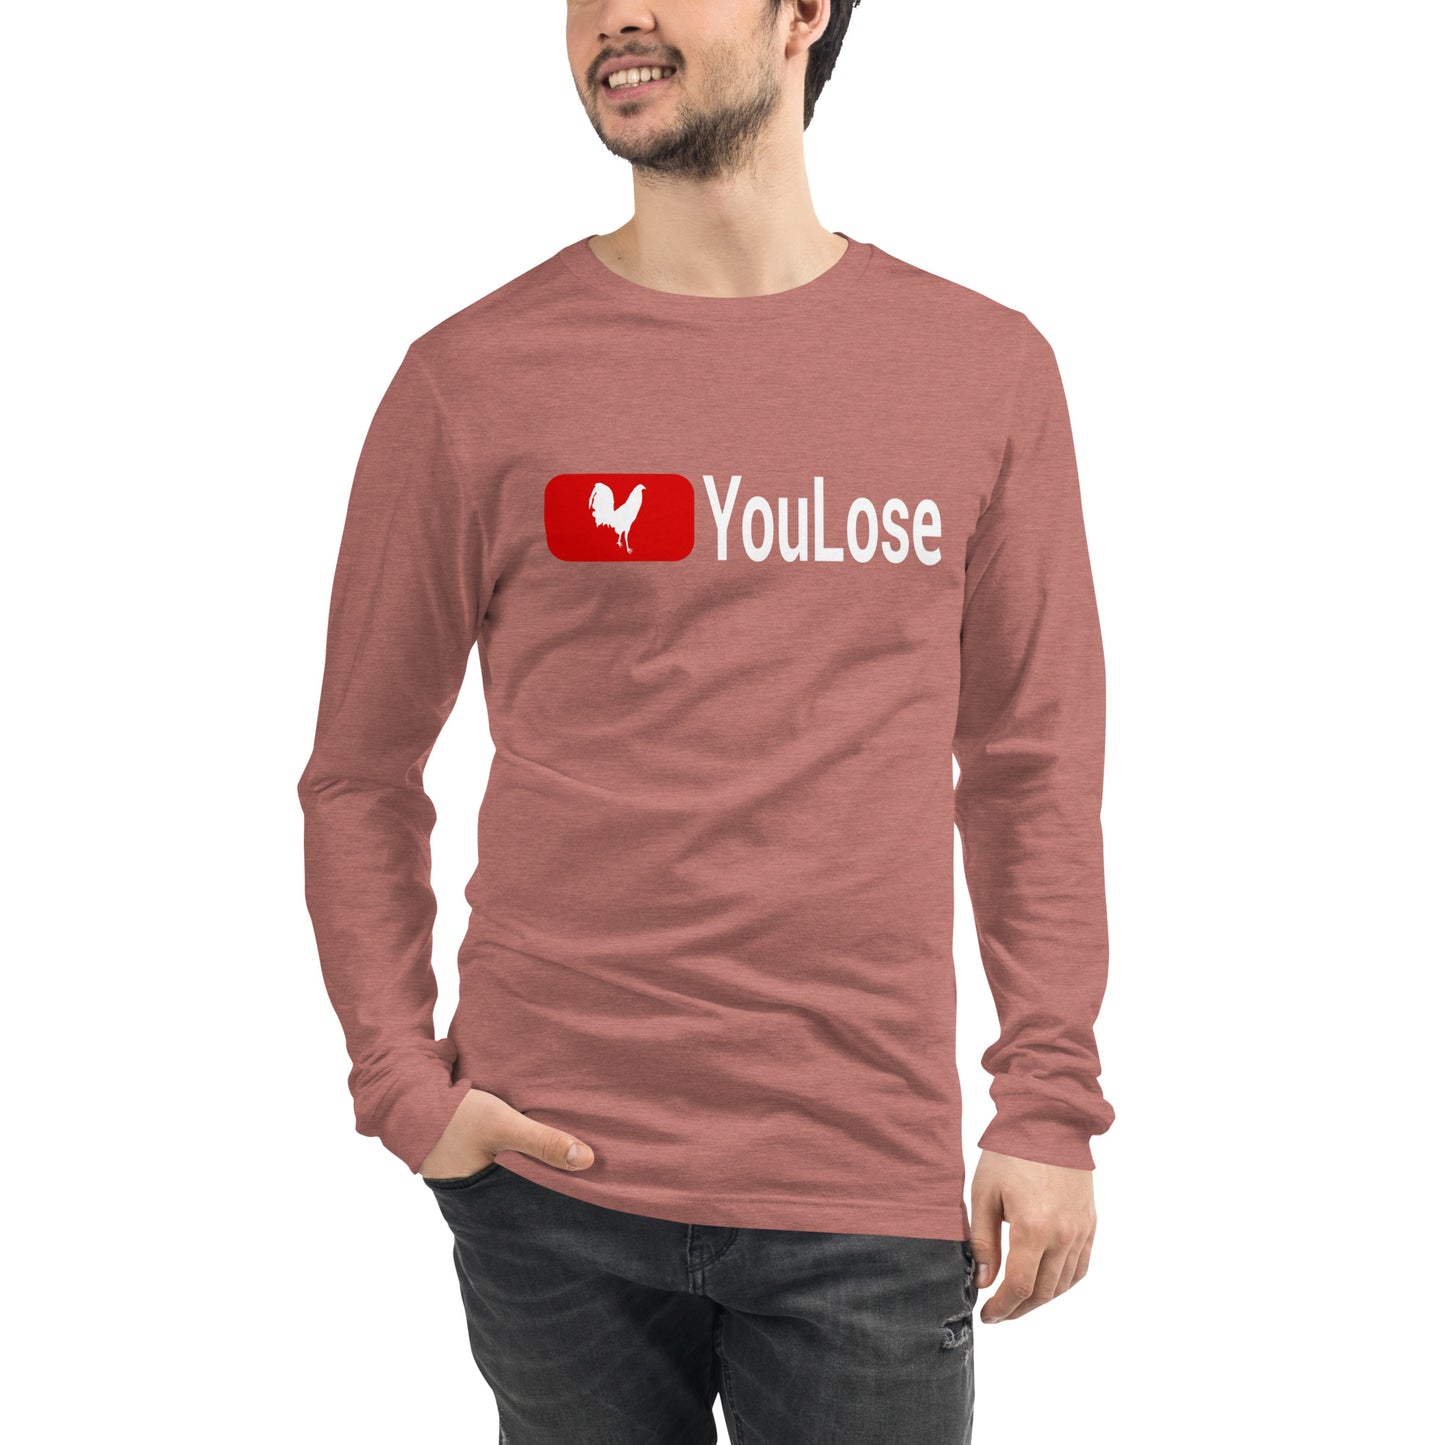 Dark YOULOSE Gamefowl Rooster Long Sleeve